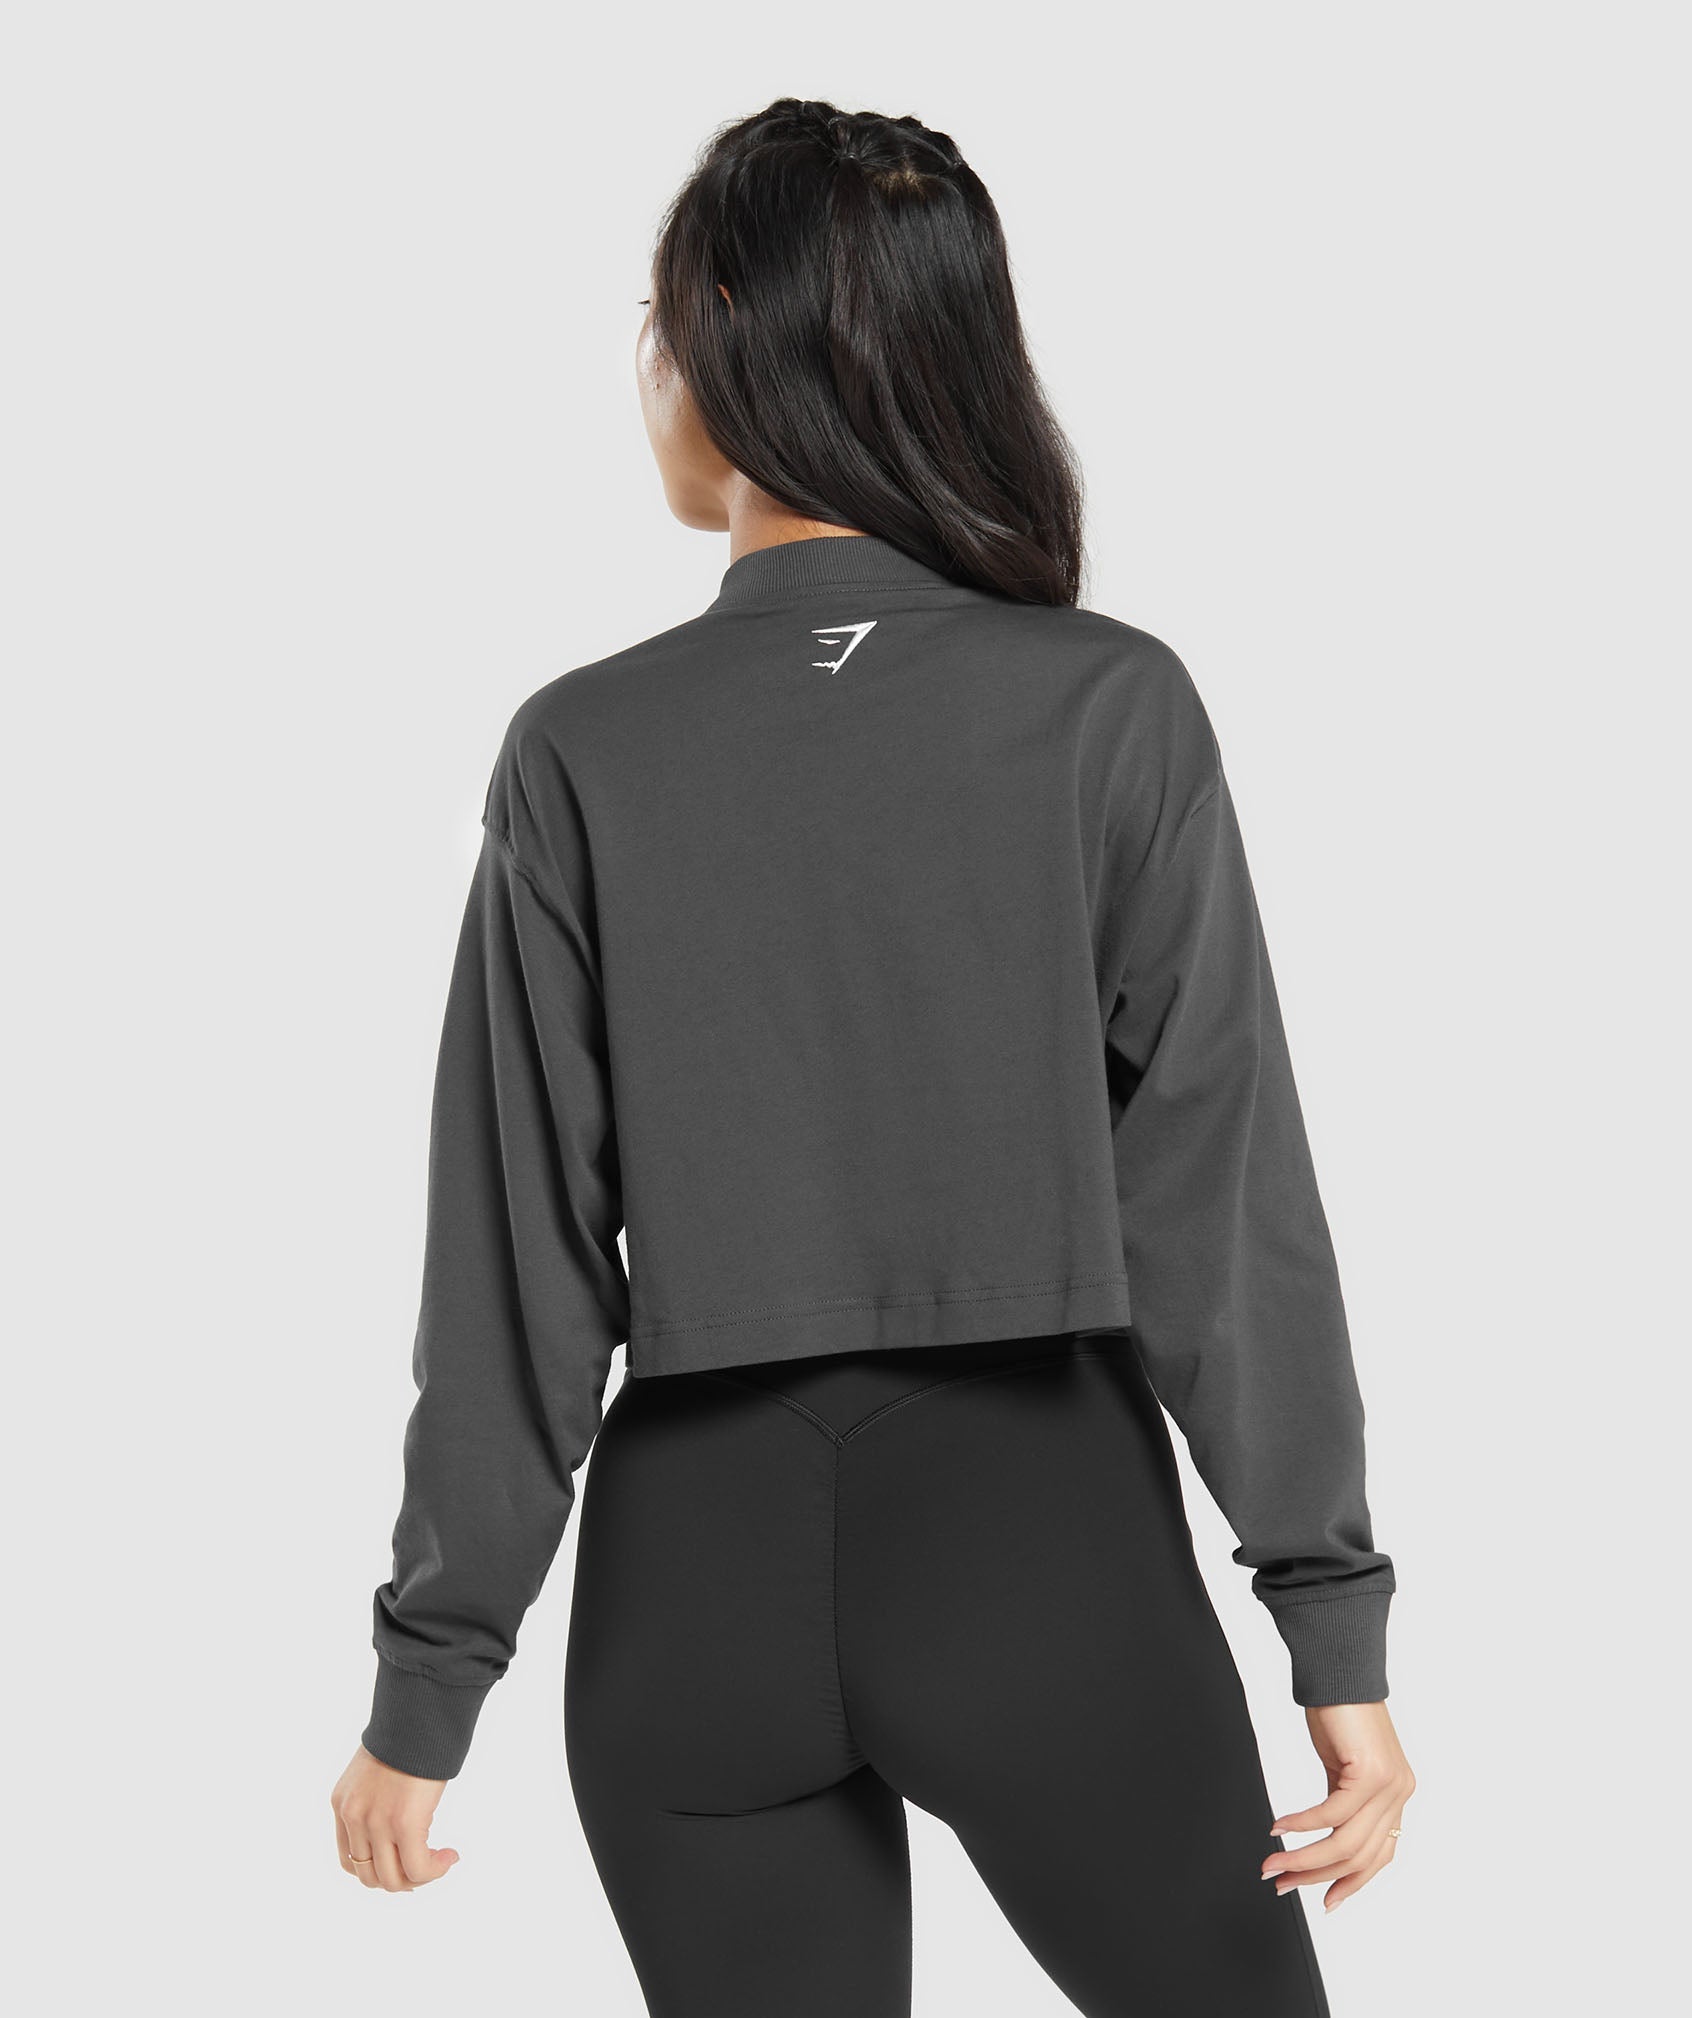 Outline Graphic Oversized Long Sleeve Top in Asphalt Grey - view 2